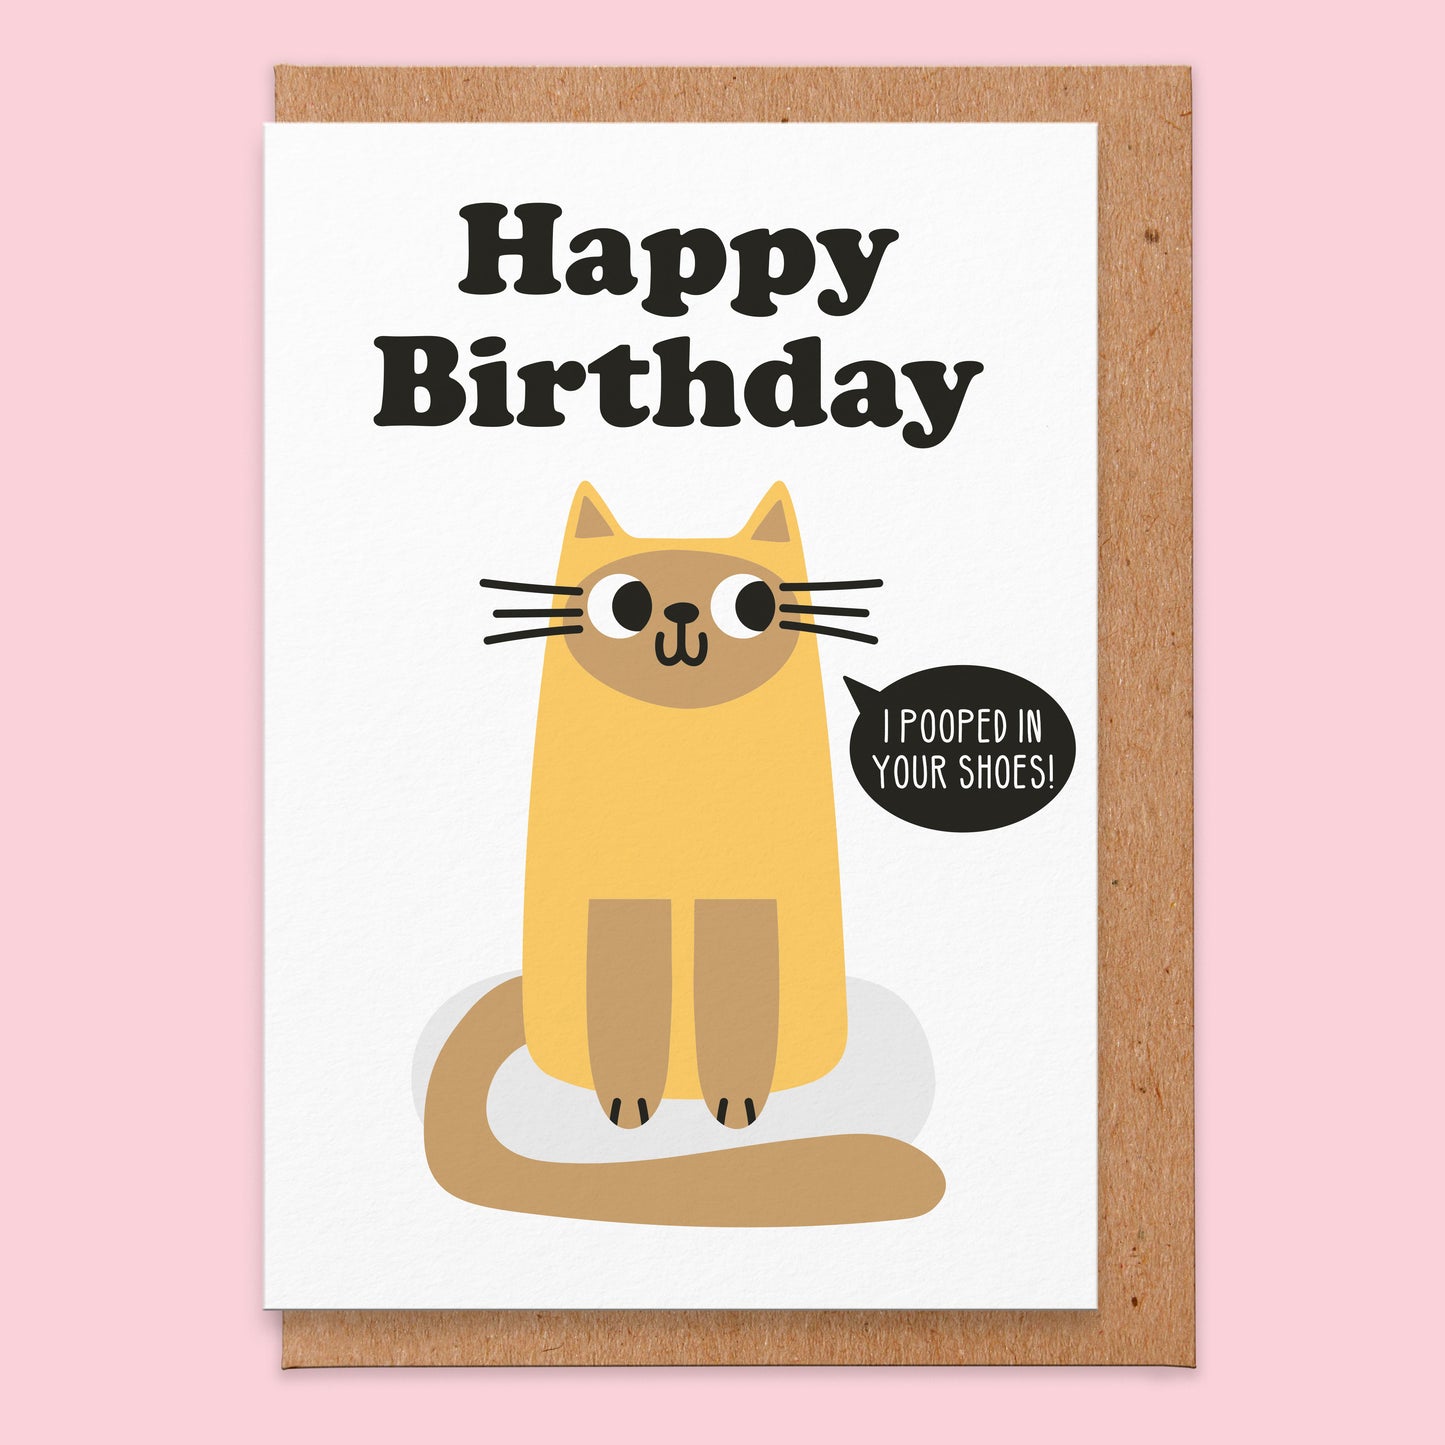 Pooped In Your Shoes Birthday Card